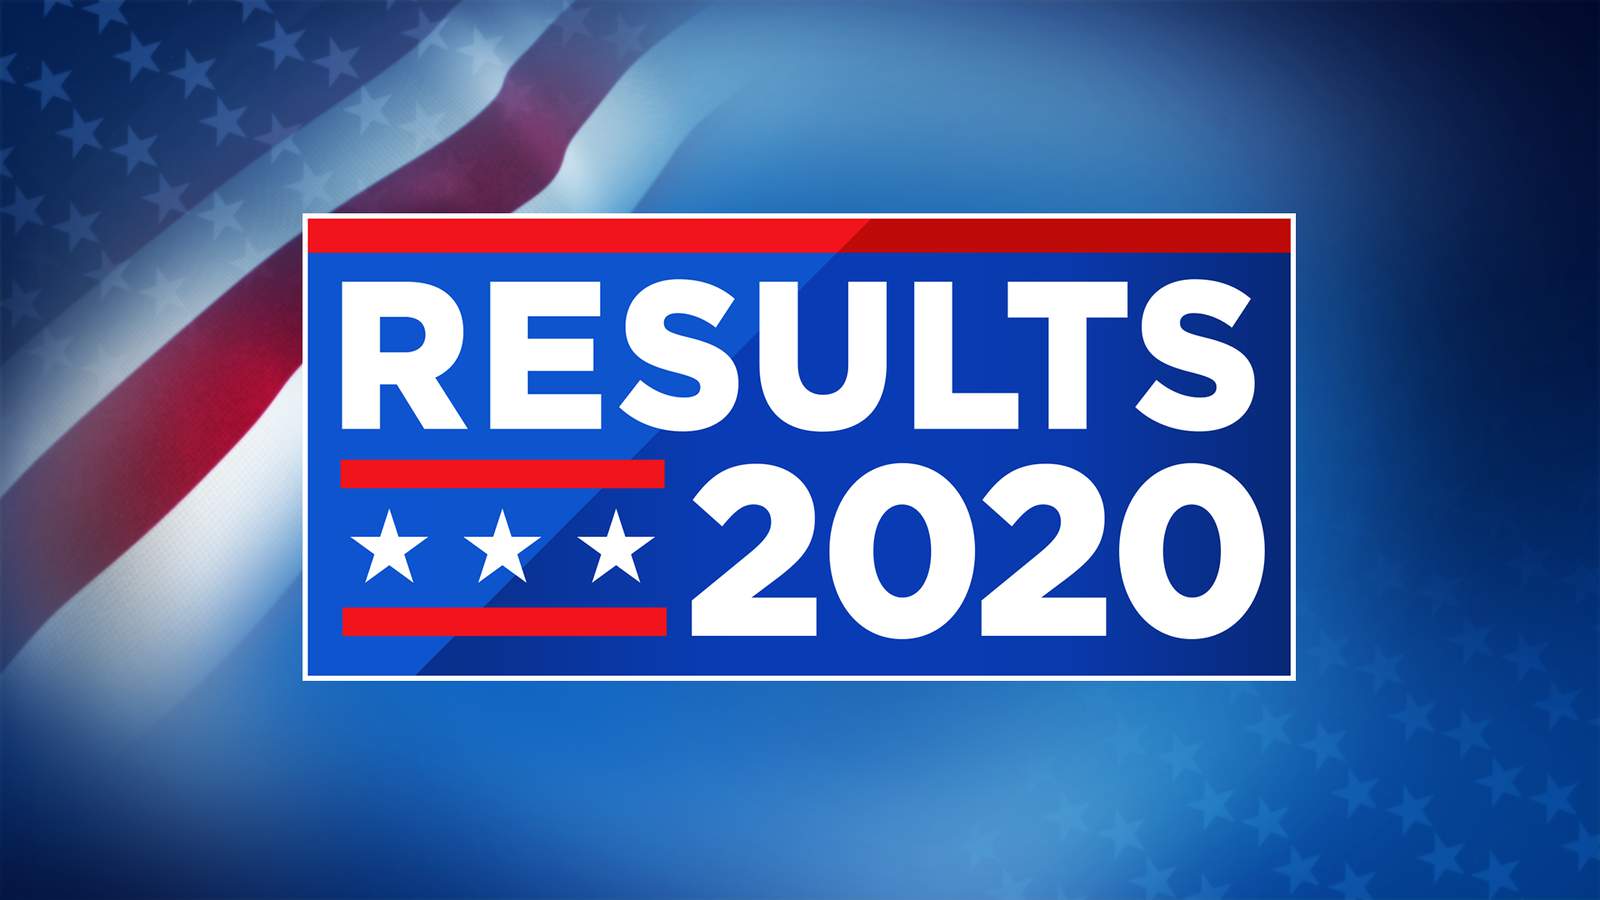 General Election Results for Central Florida State Attorneys on Nov. 3, 2020